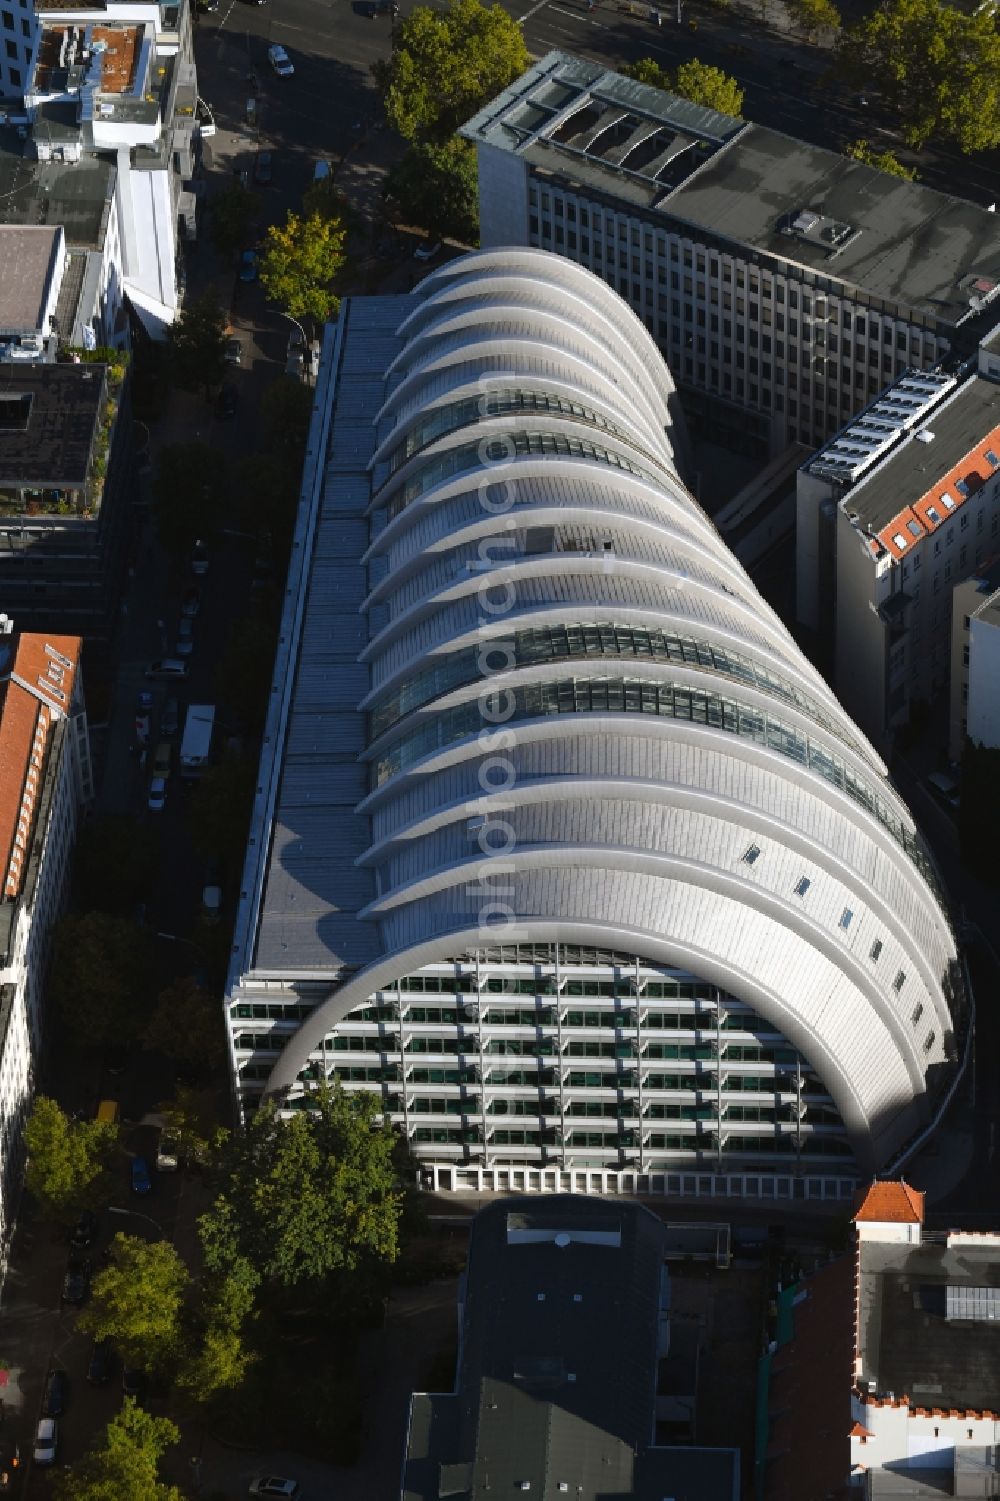 Aerial photograph Berlin - The Ludwig-Erhard-Haus (commonly known as Armadillo), the seat of the Berlin Stock Exchange and the Chamber of Commerce's (ICC). The building was constructed by Nicholas Grimshaw and Partners. It is located Fasanenstrasse in Berlin's Charlottenburg